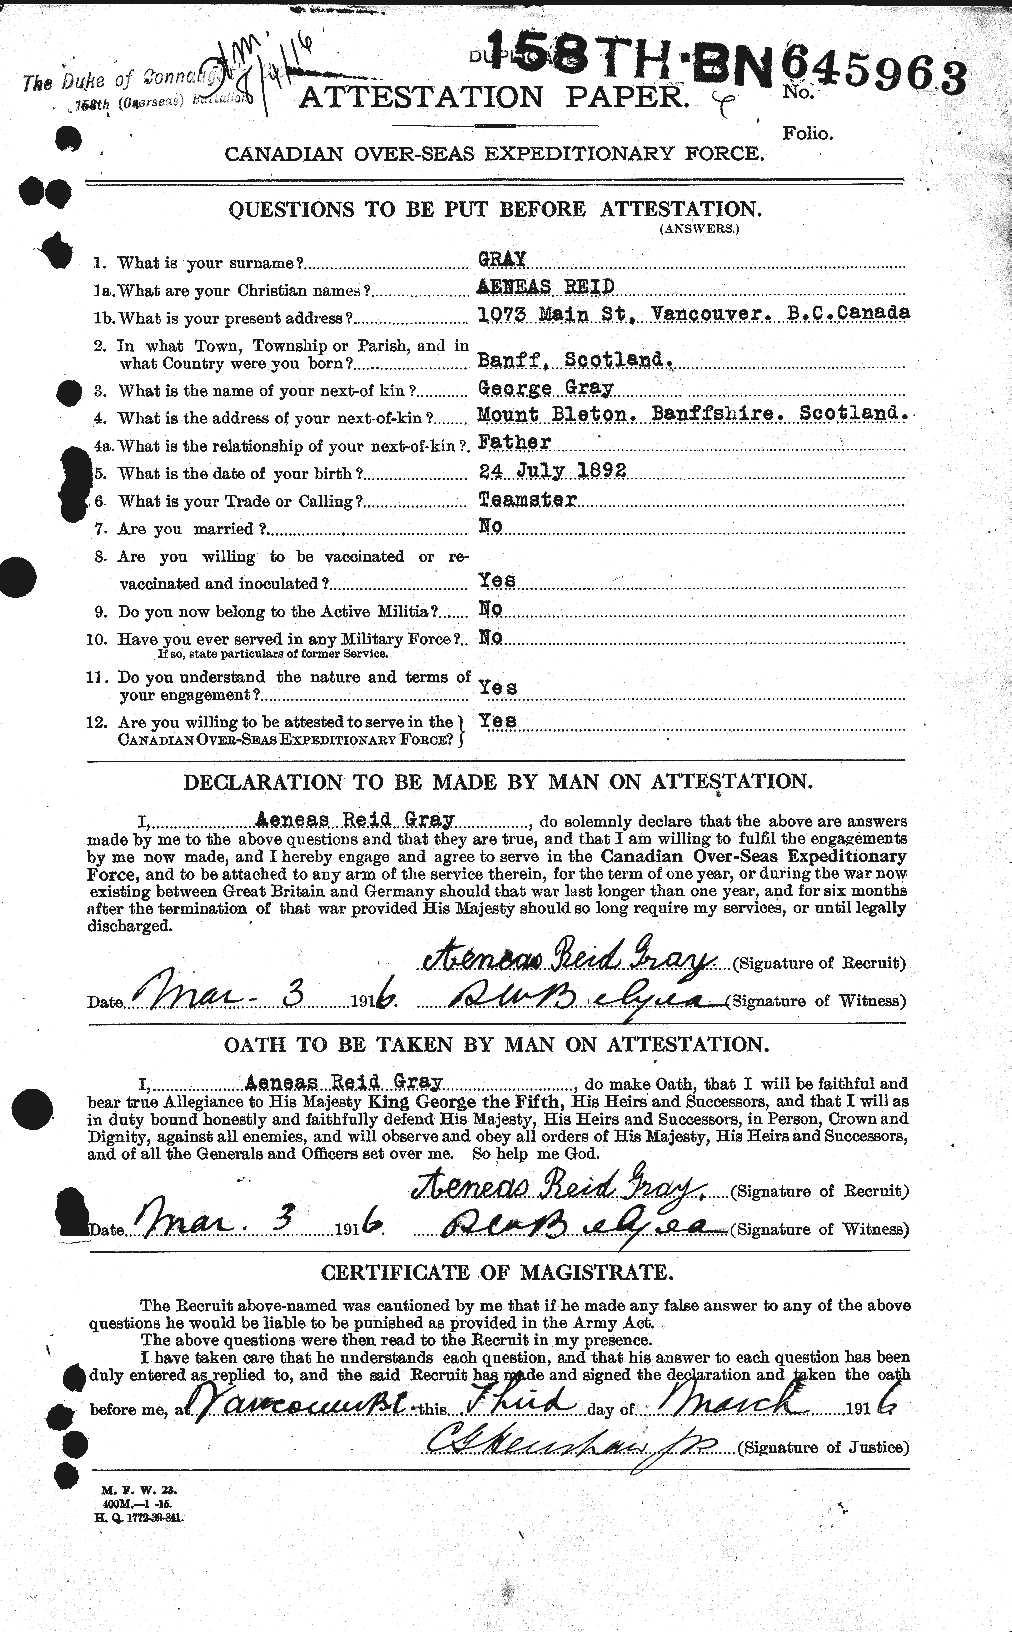 Personnel Records of the First World War - CEF 359907a